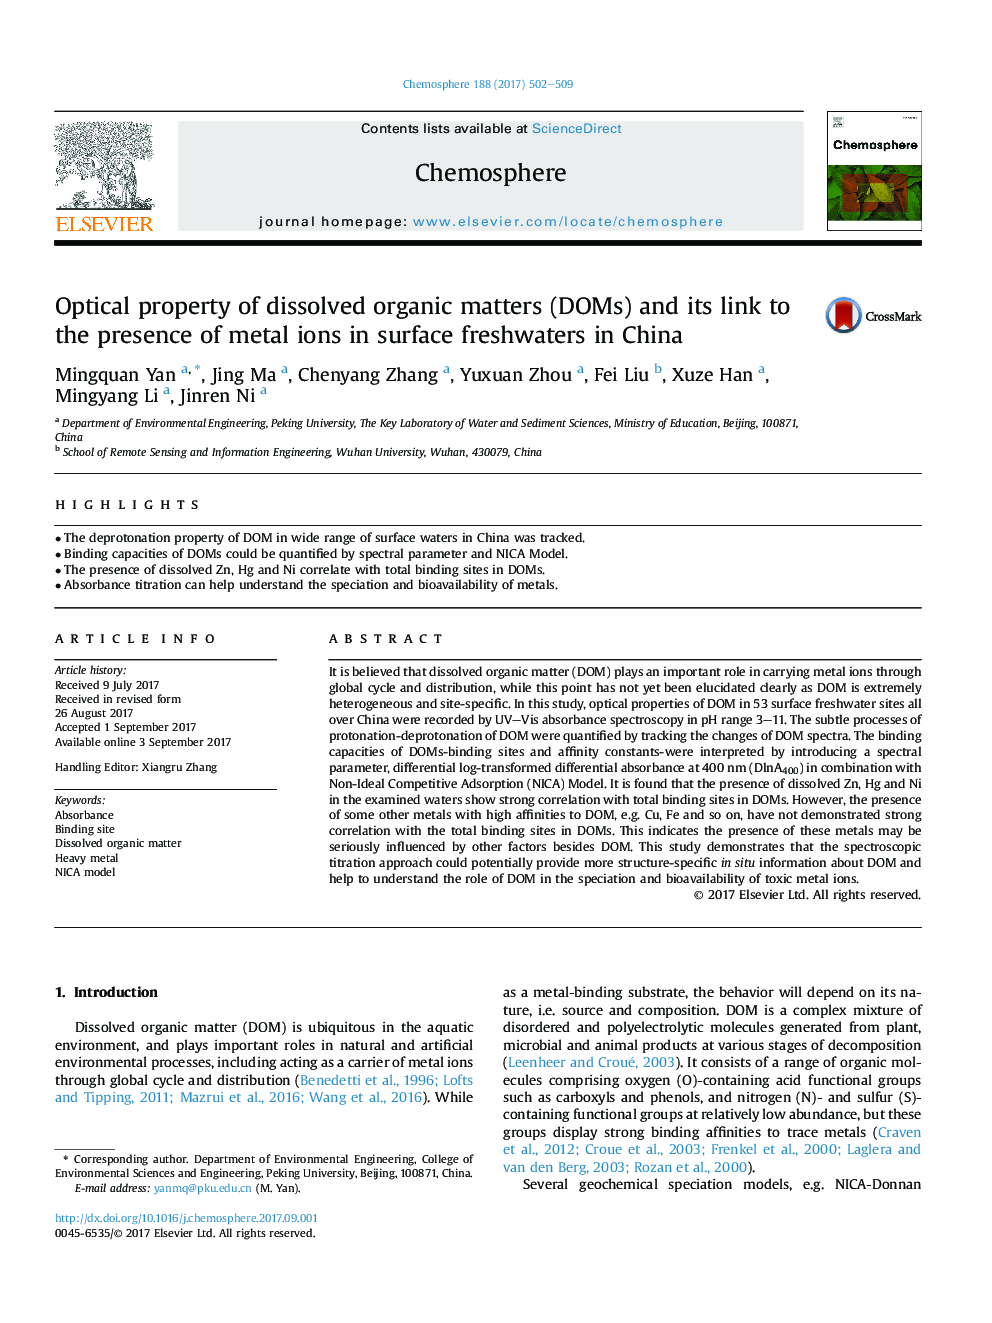 Optical property of dissolved organic matters (DOMs) and its link to the presence of metal ions in surface freshwaters in China